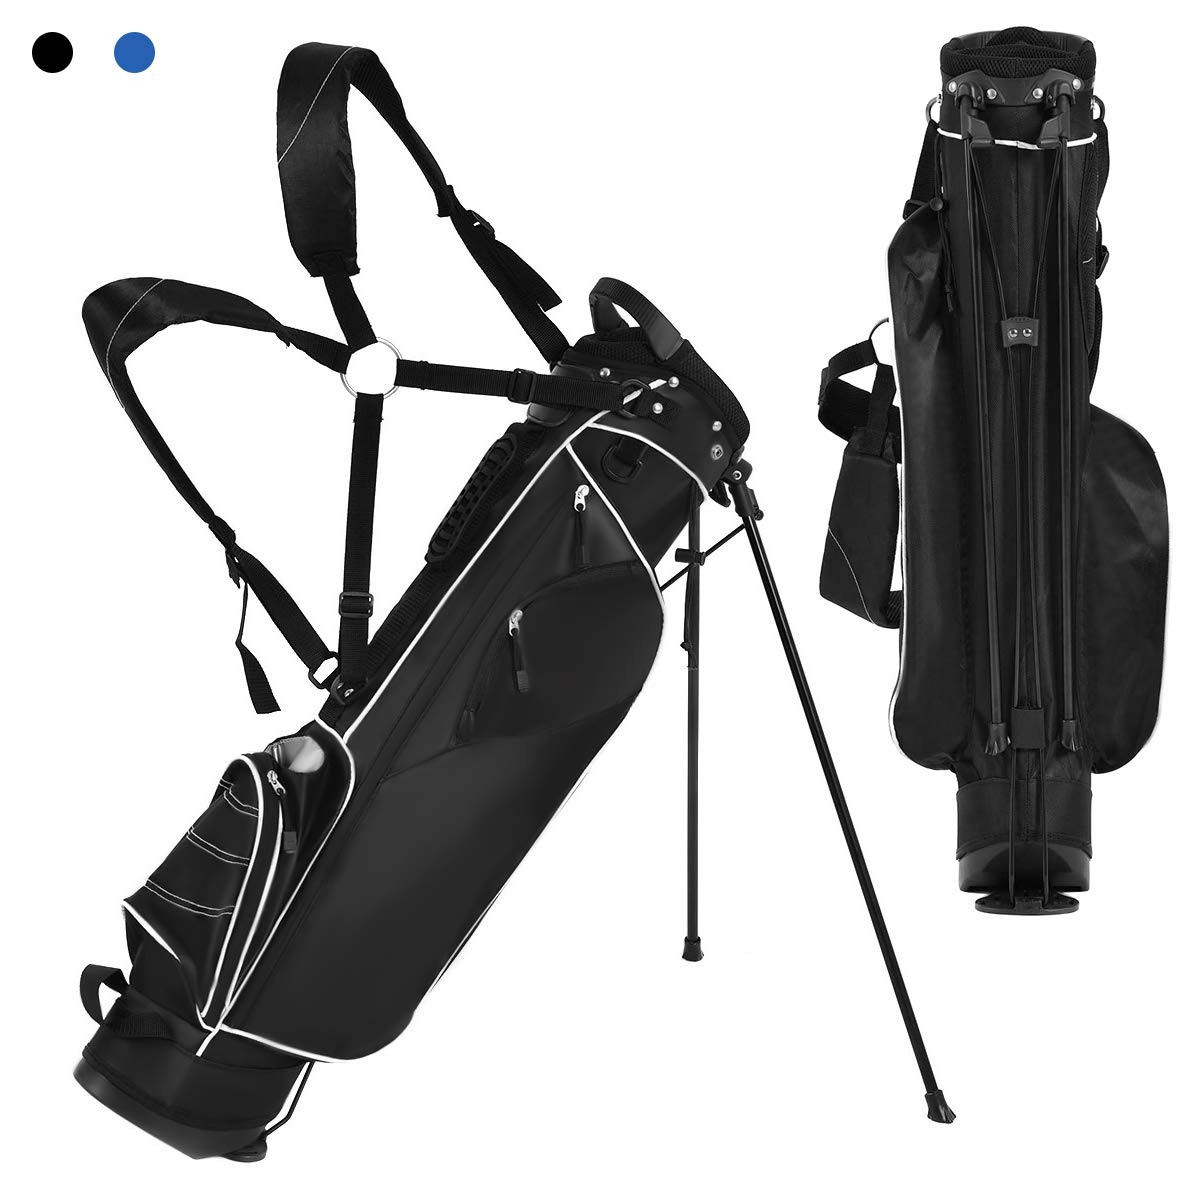 The Tangkula lightweight golf bag is only 3.5 pounds